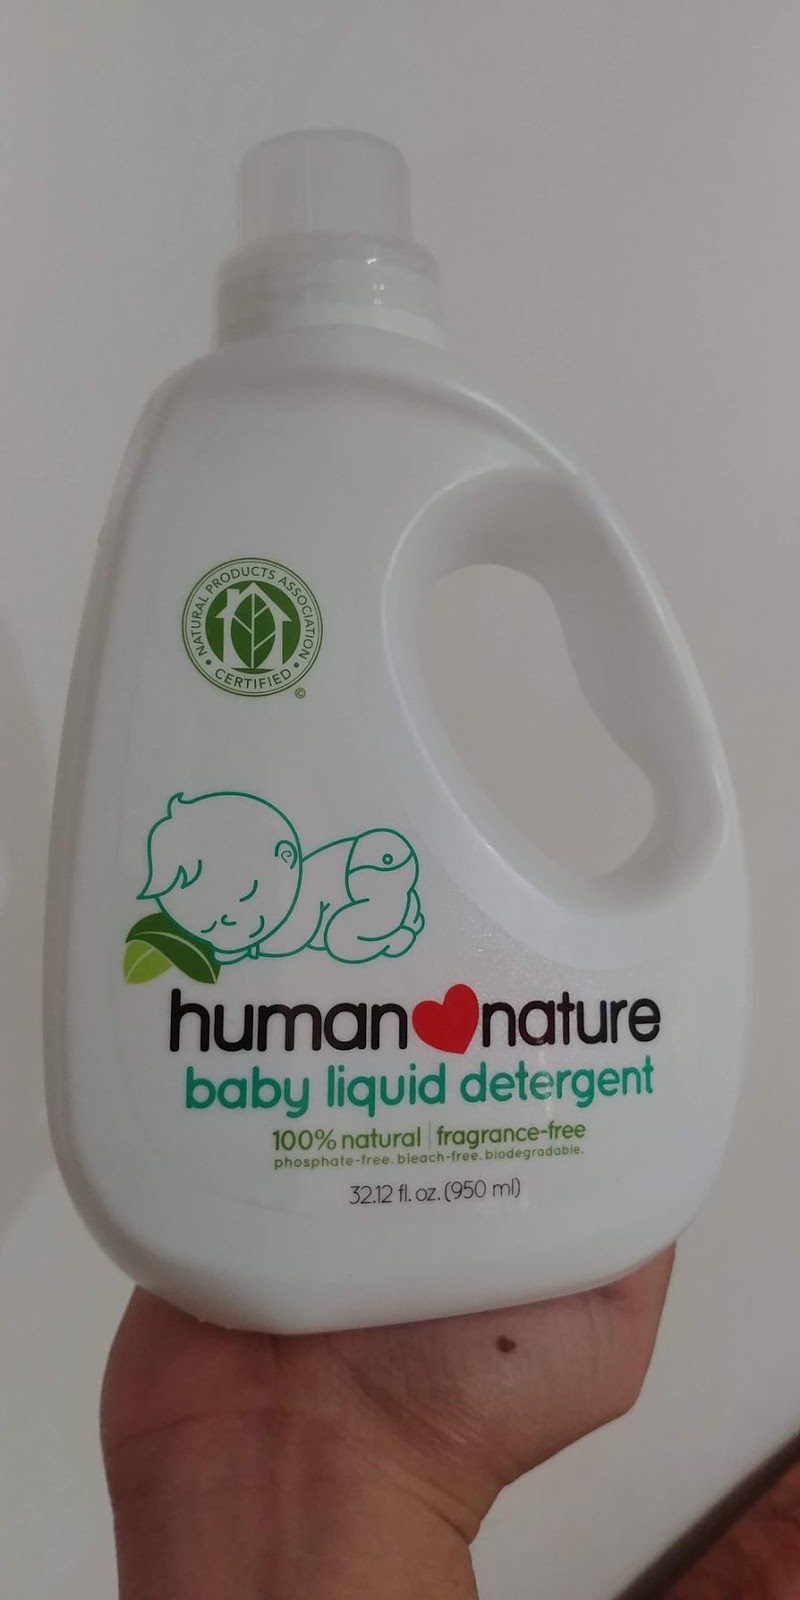 Human Nature is one of the top 5 baby products that we trust